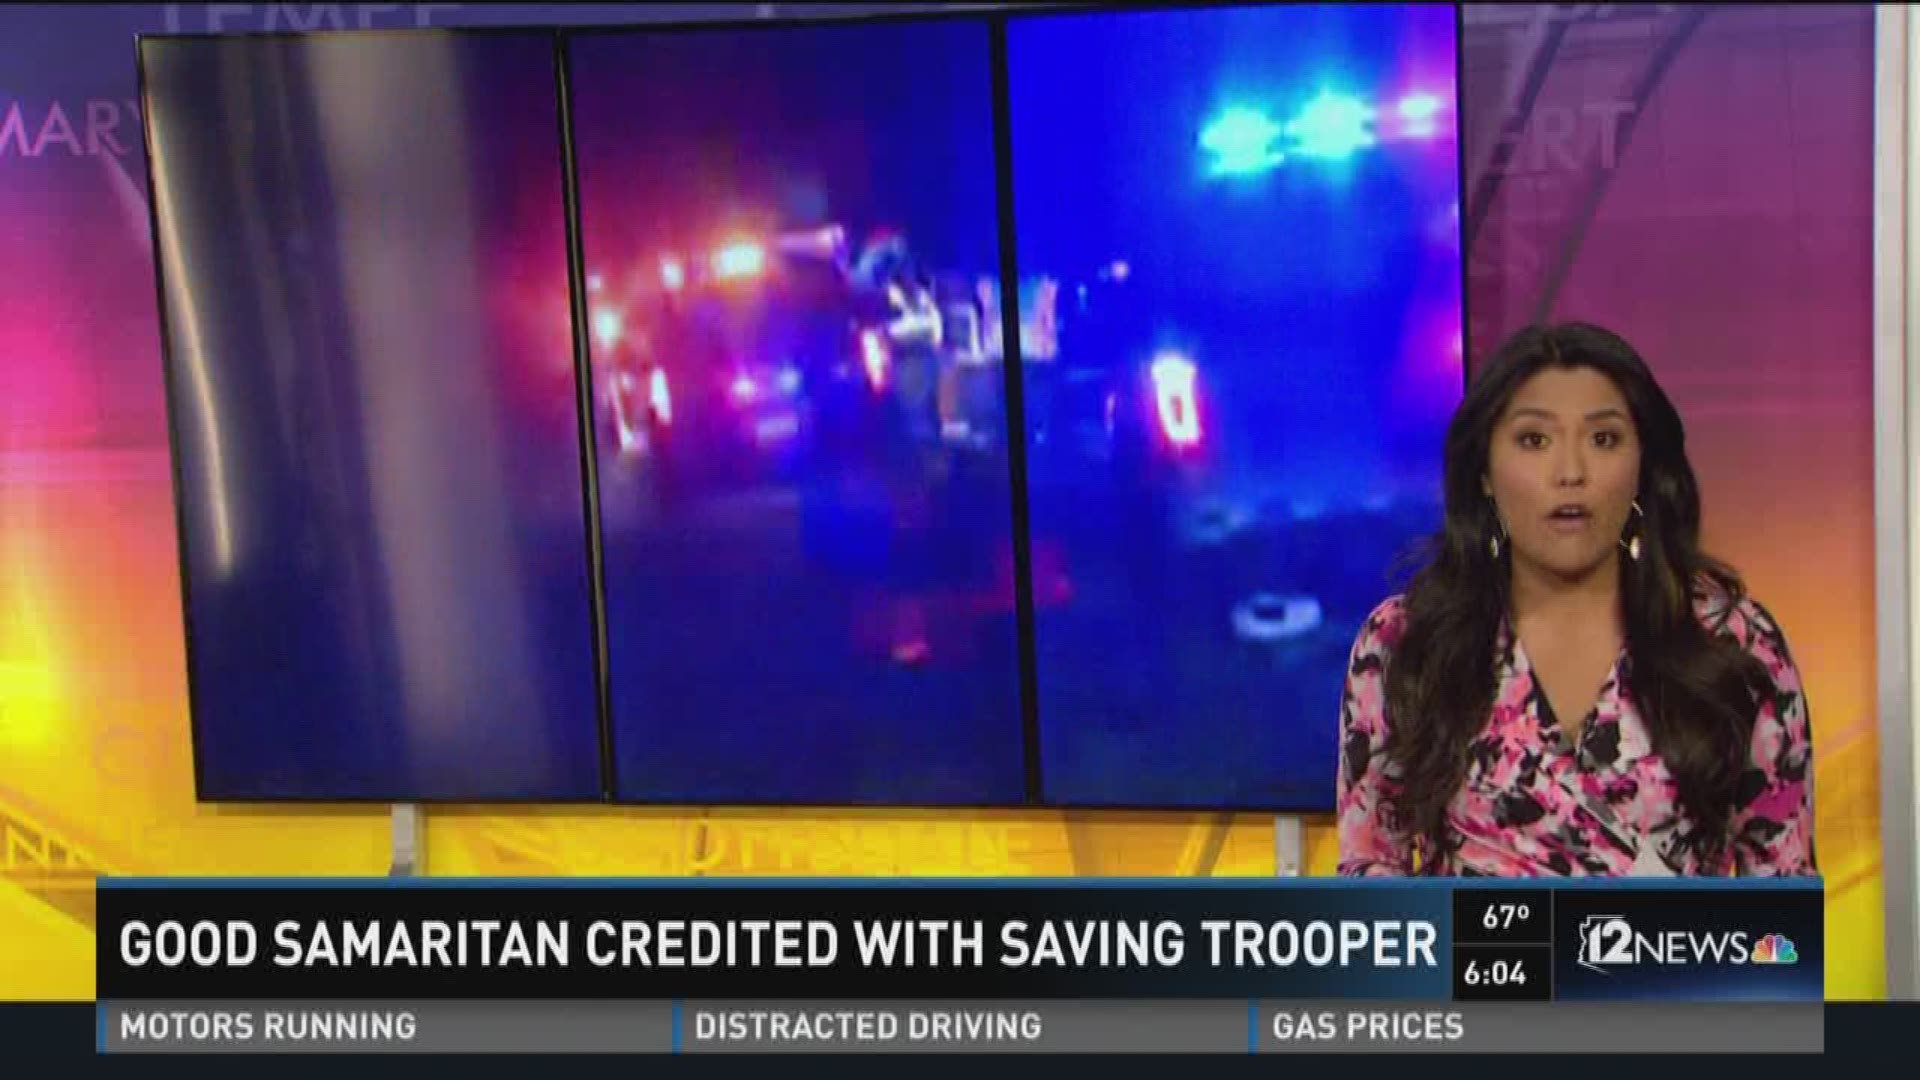 A driver is being praised with saving the life of a DPS trooper.